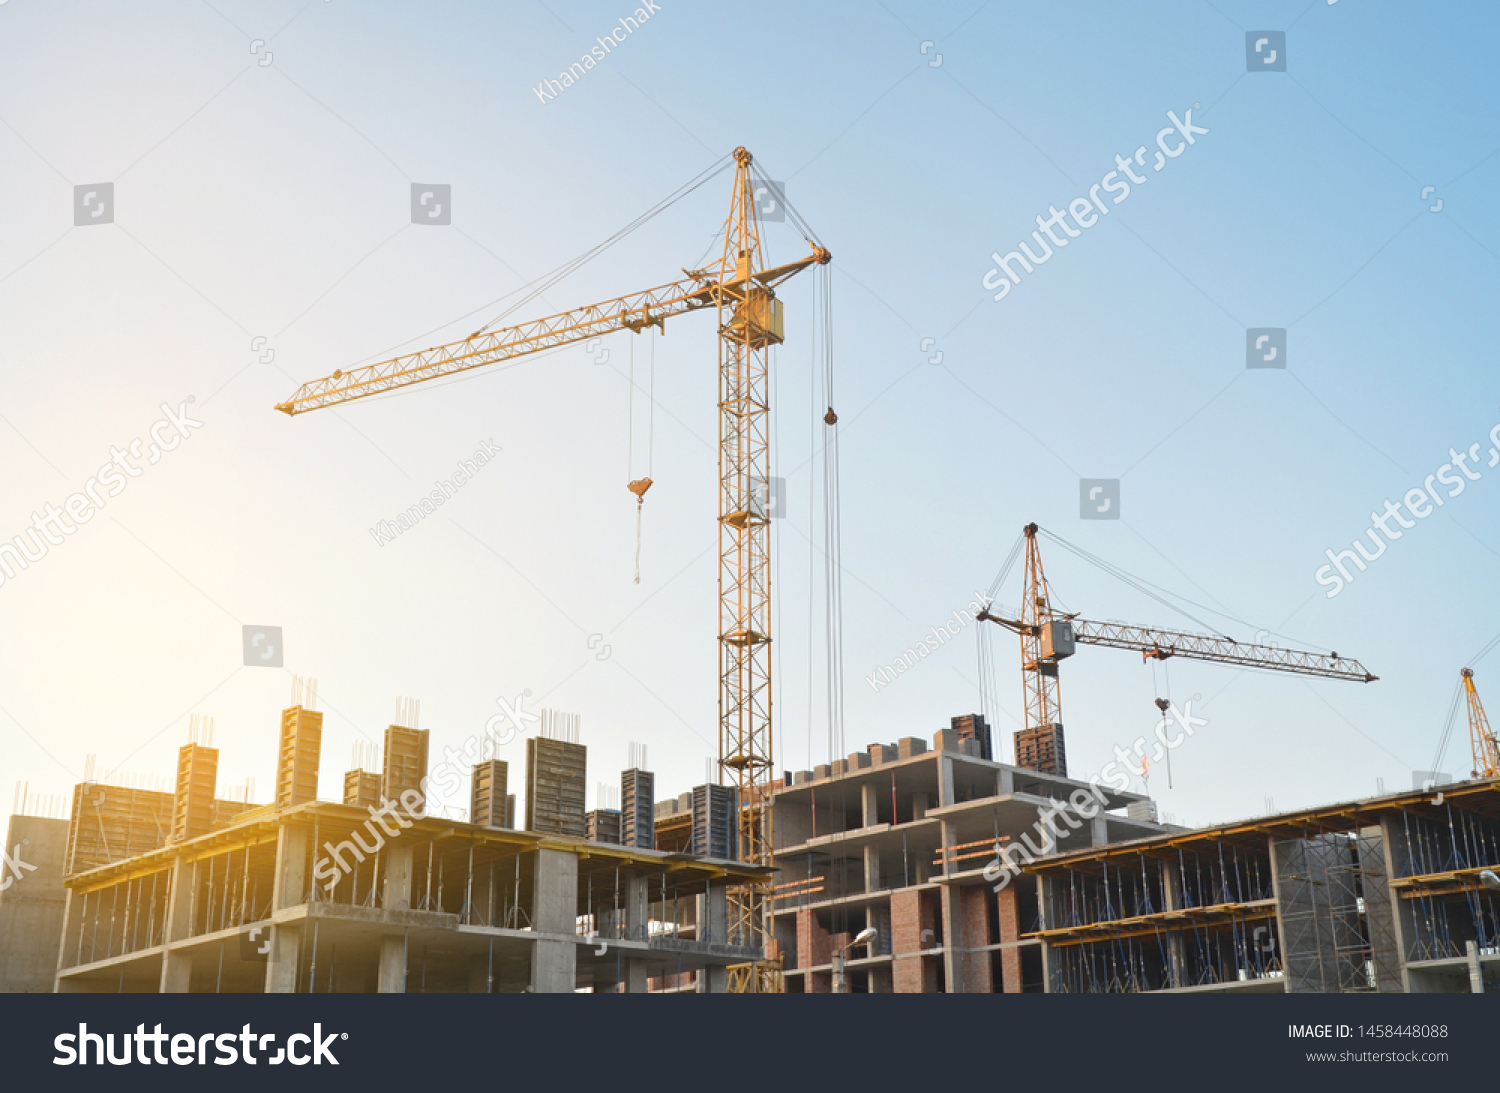 Construction crane on the background of the sky. Construction site. #1458448088